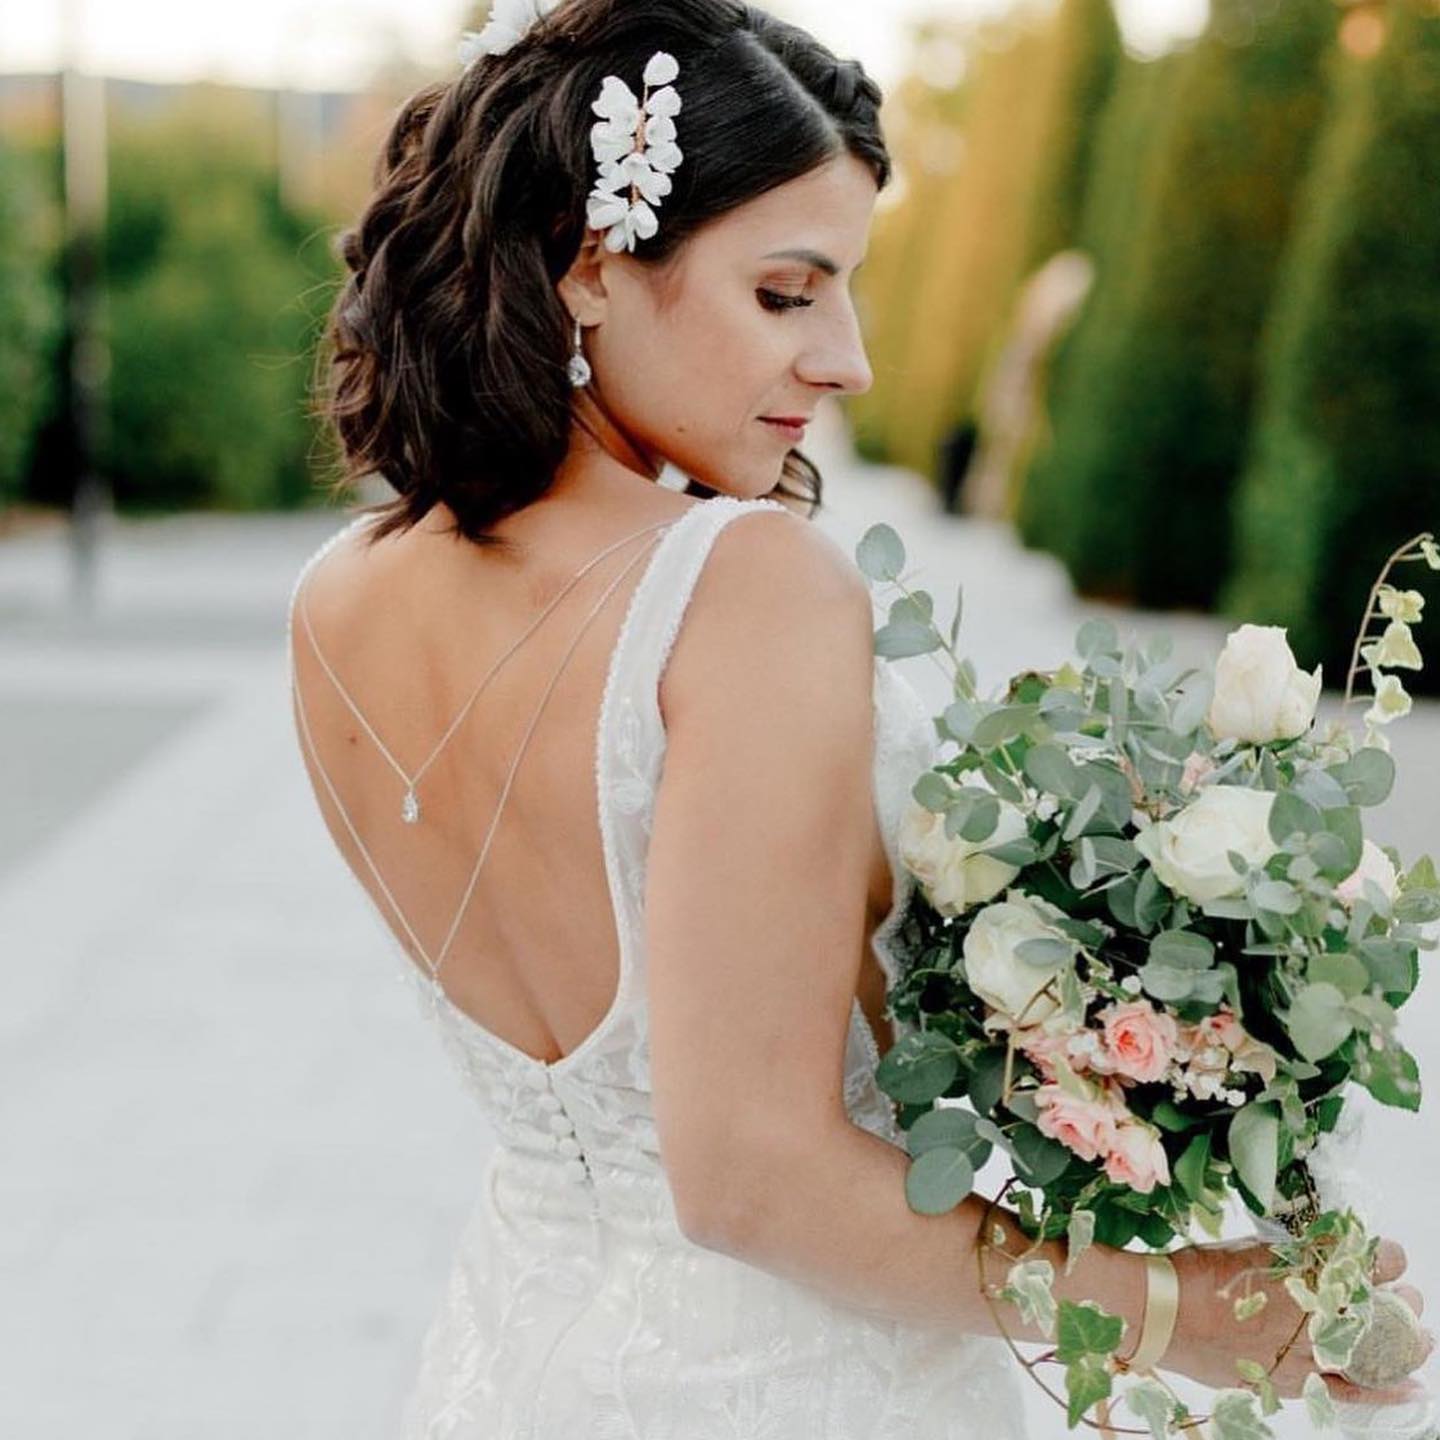 Five Ways To Shop For Your Bridal Accessories